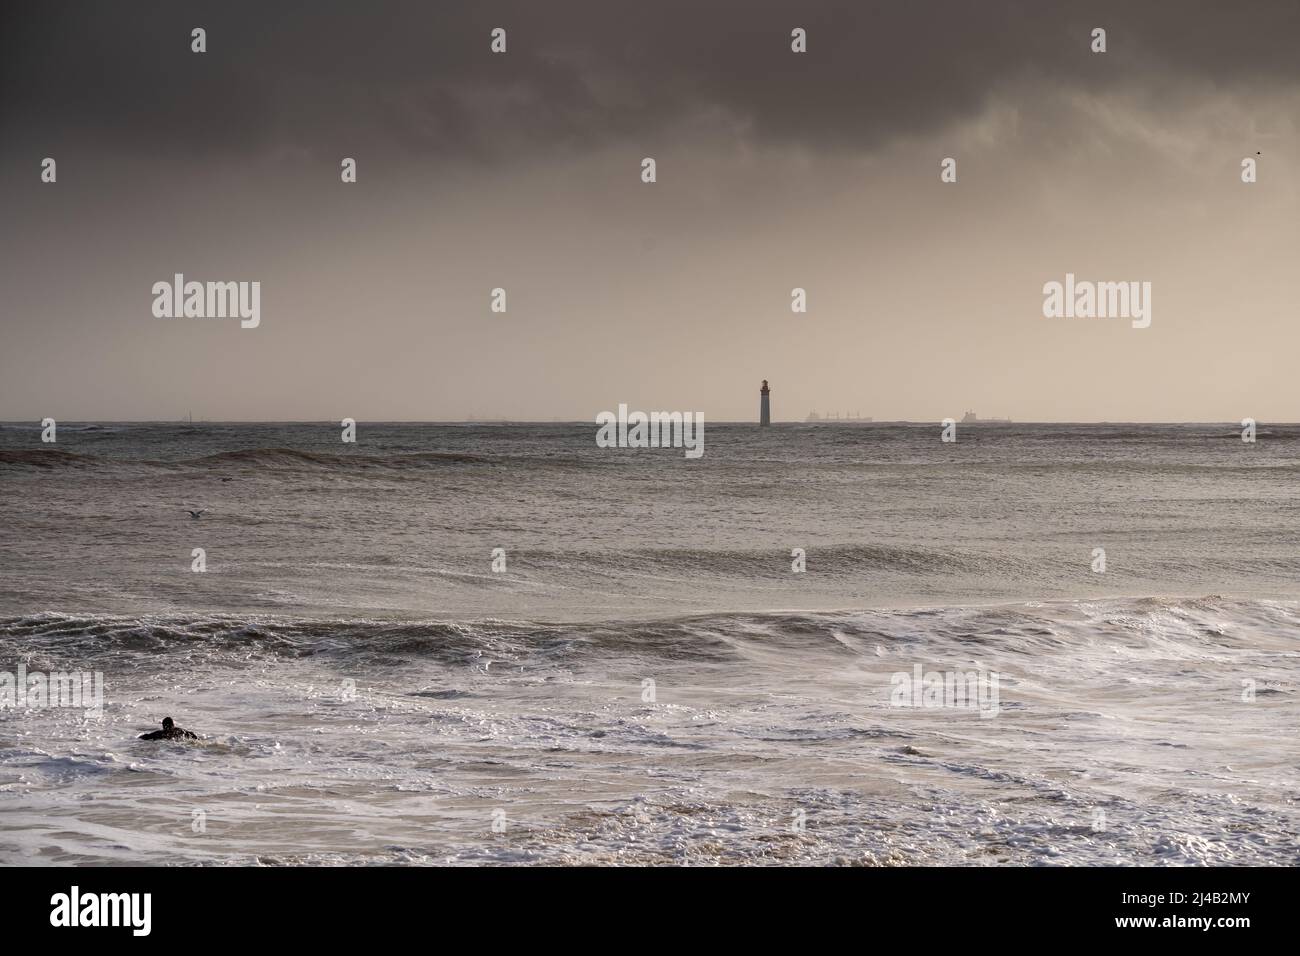 silhouette of surfer in waves with Chauveau lighthouse, the famous lighthouse near La Rochelle and Re island Stock Photo